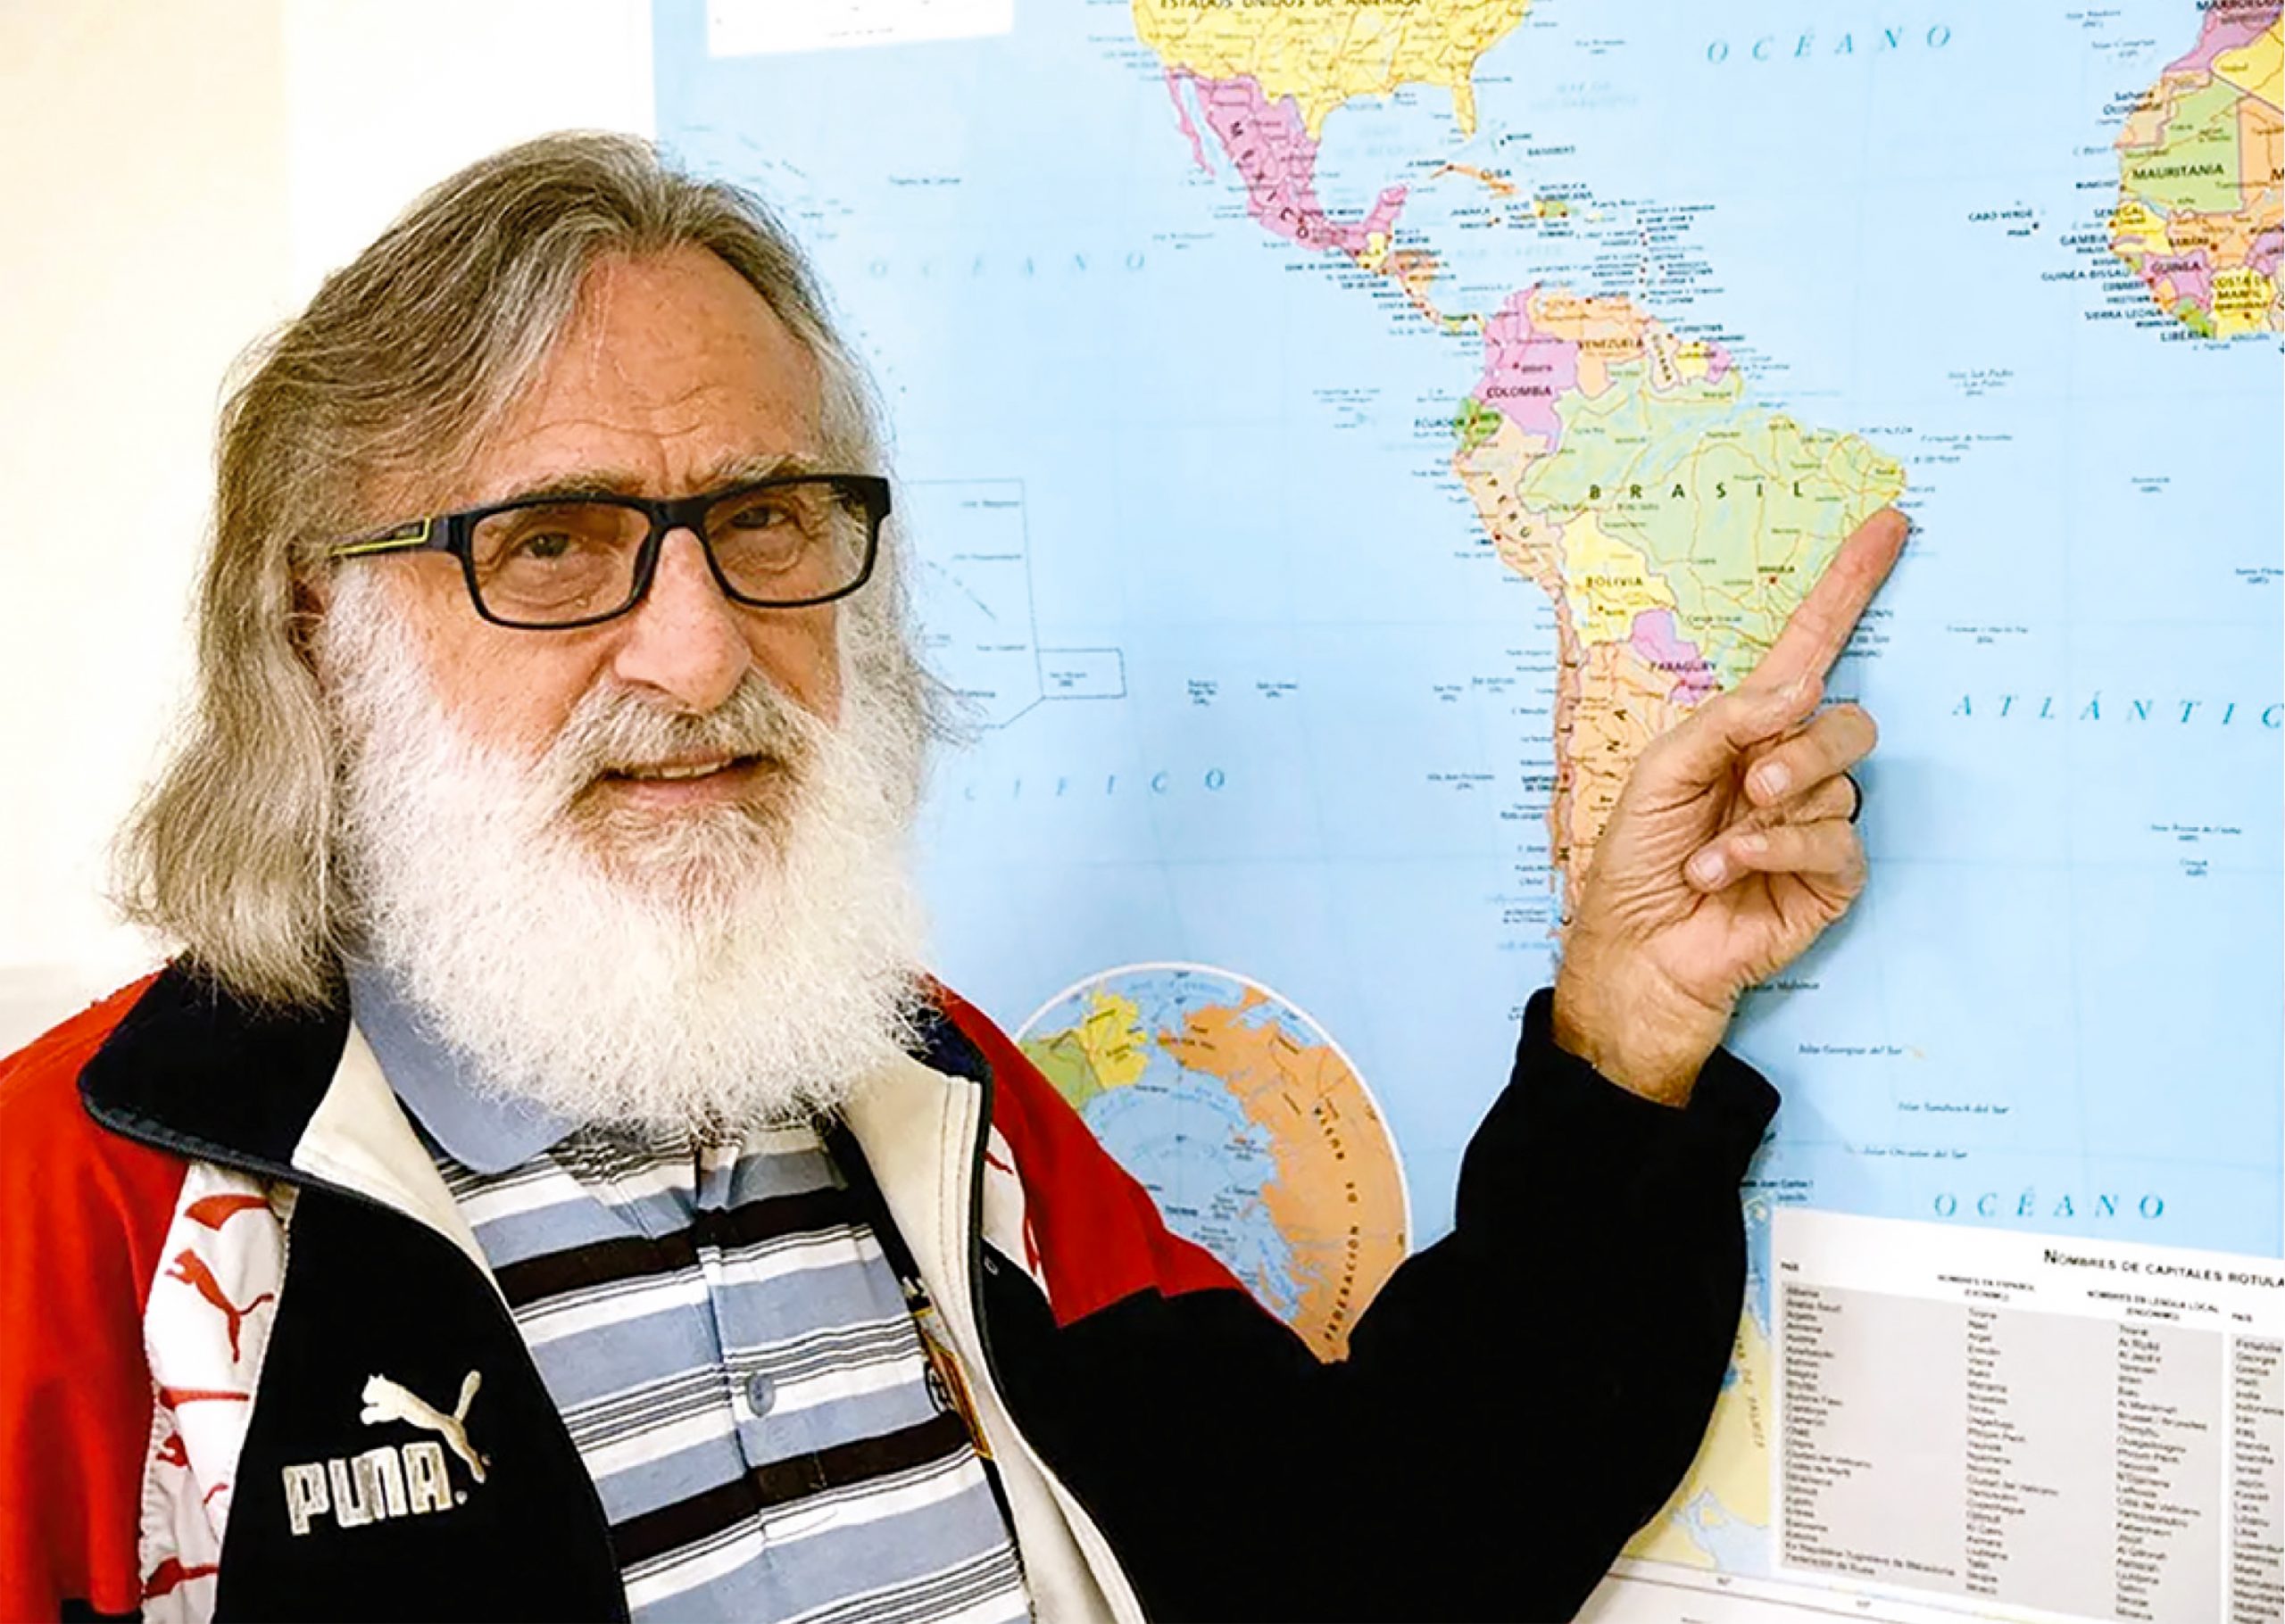 Fr Carlos Basacarn pointing to Africa on a map. He has a long, white beard and is wearing dark rimmed glasses.